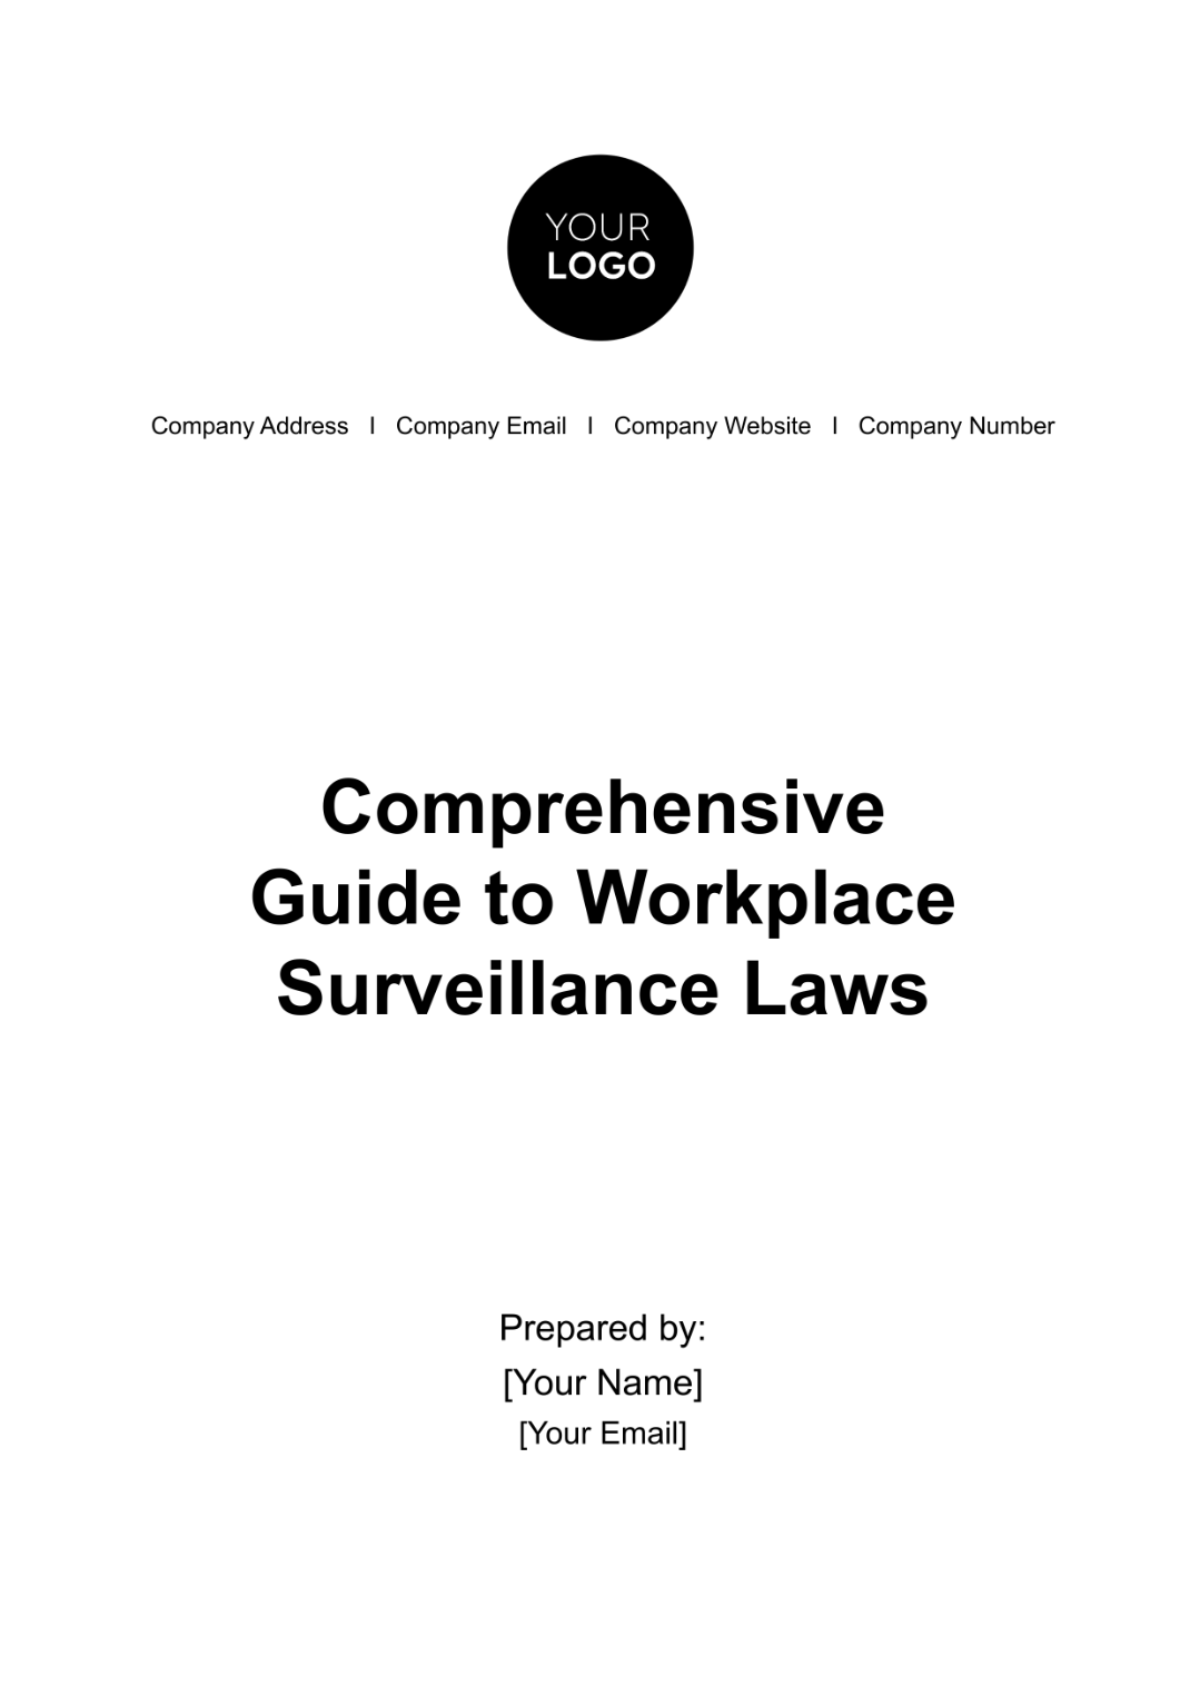 Free Comprehensive Guide to Workplace Surveillance Laws HR Template